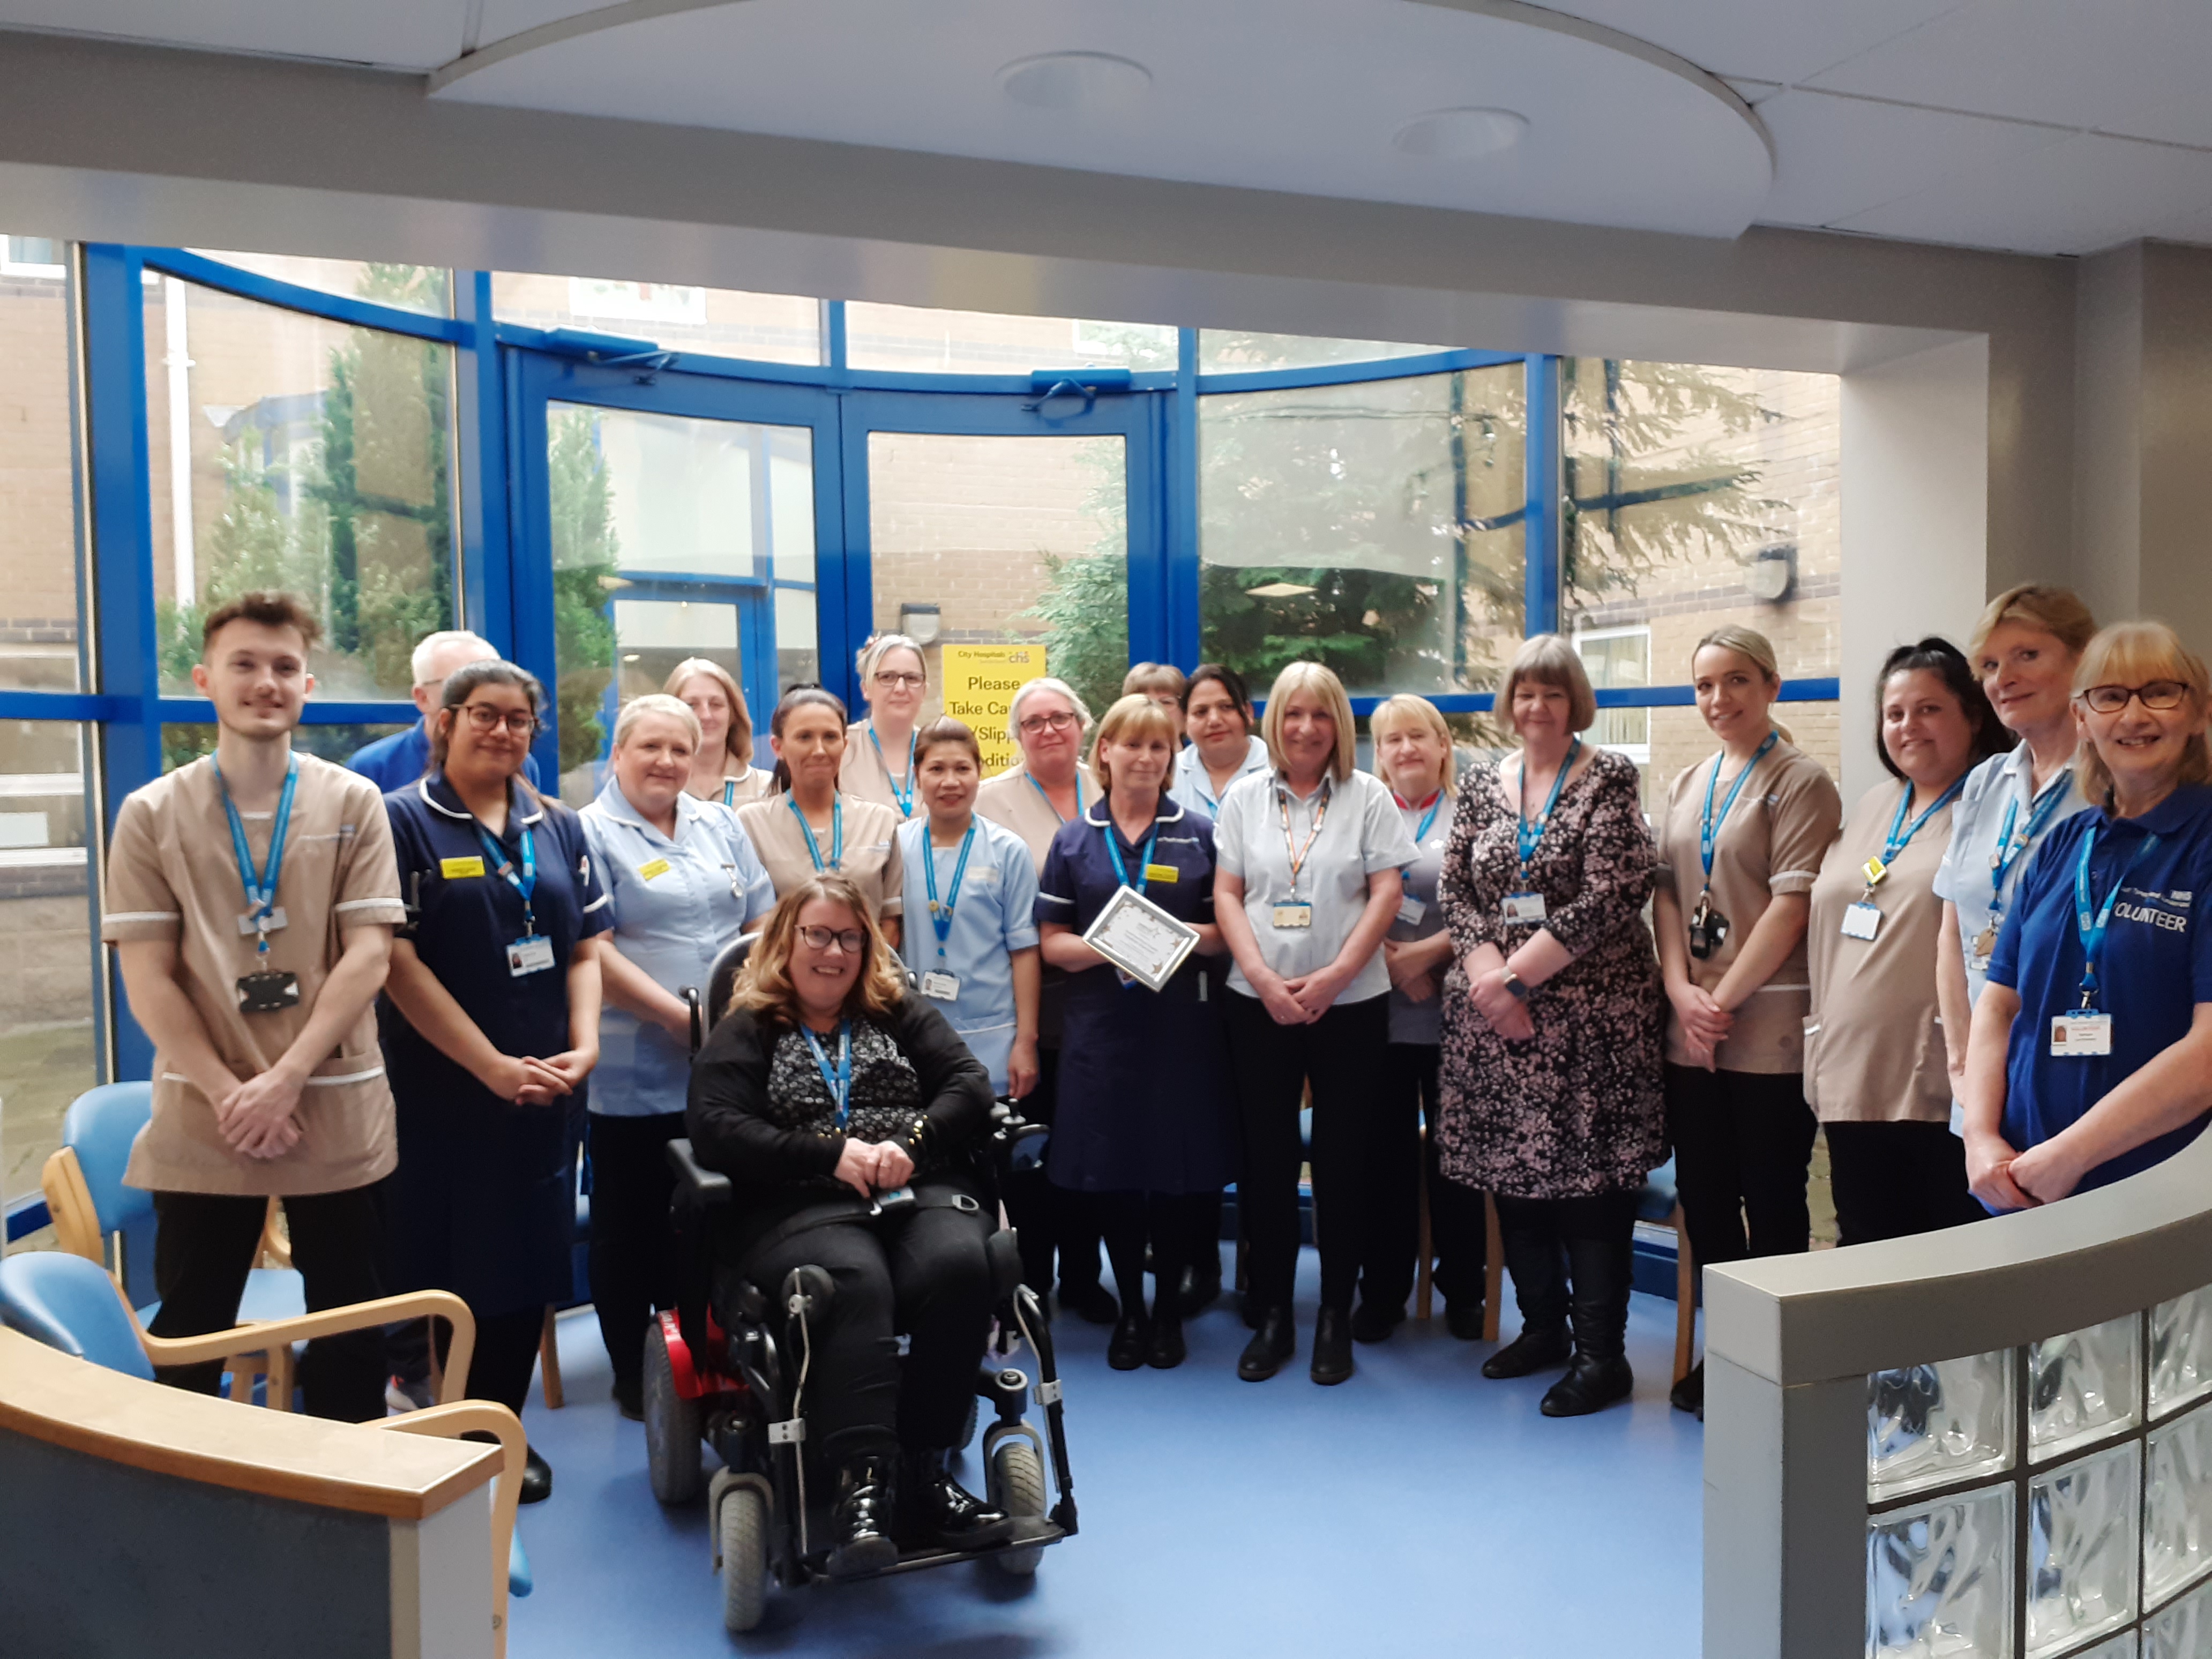 Sunderland Royal Hospital staff standing and smiling at the camera